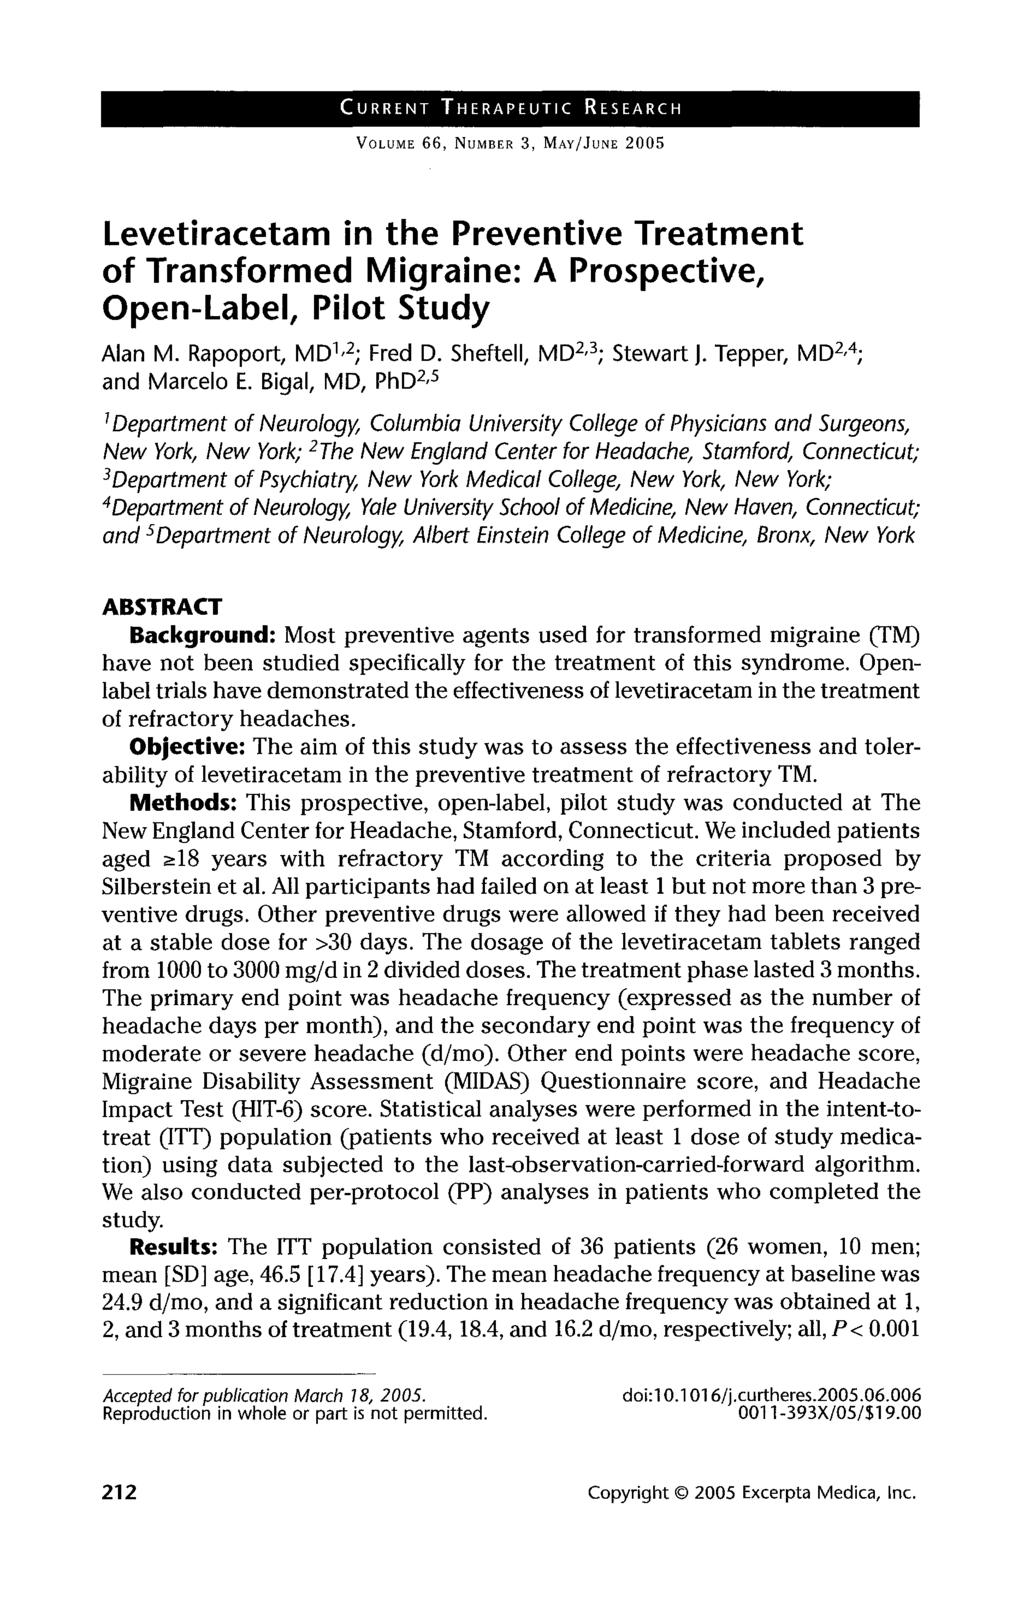 VOLUME 66, NUMBER 3, MAY/JUNE 2005 Levetiracetam in the Preventive Treatment of Transformed Migraine: A Prospective, Open-Label, Pilot Study Alan M. Rapoport, MD1,2; Fred D.